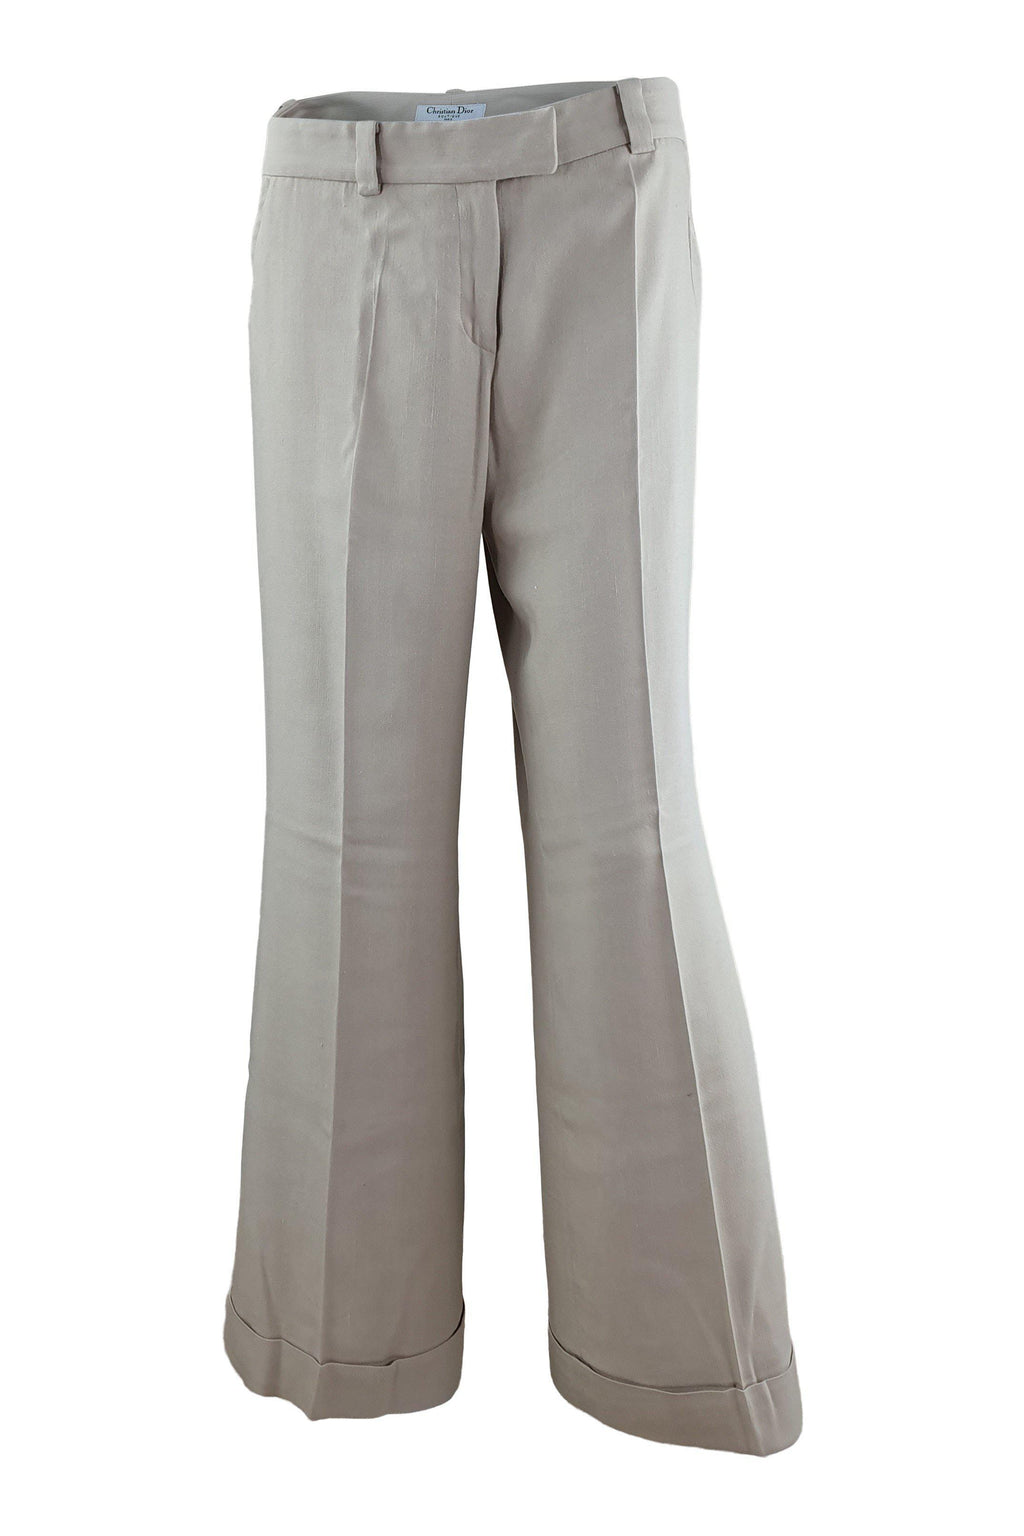 women's trousers – The Freperie